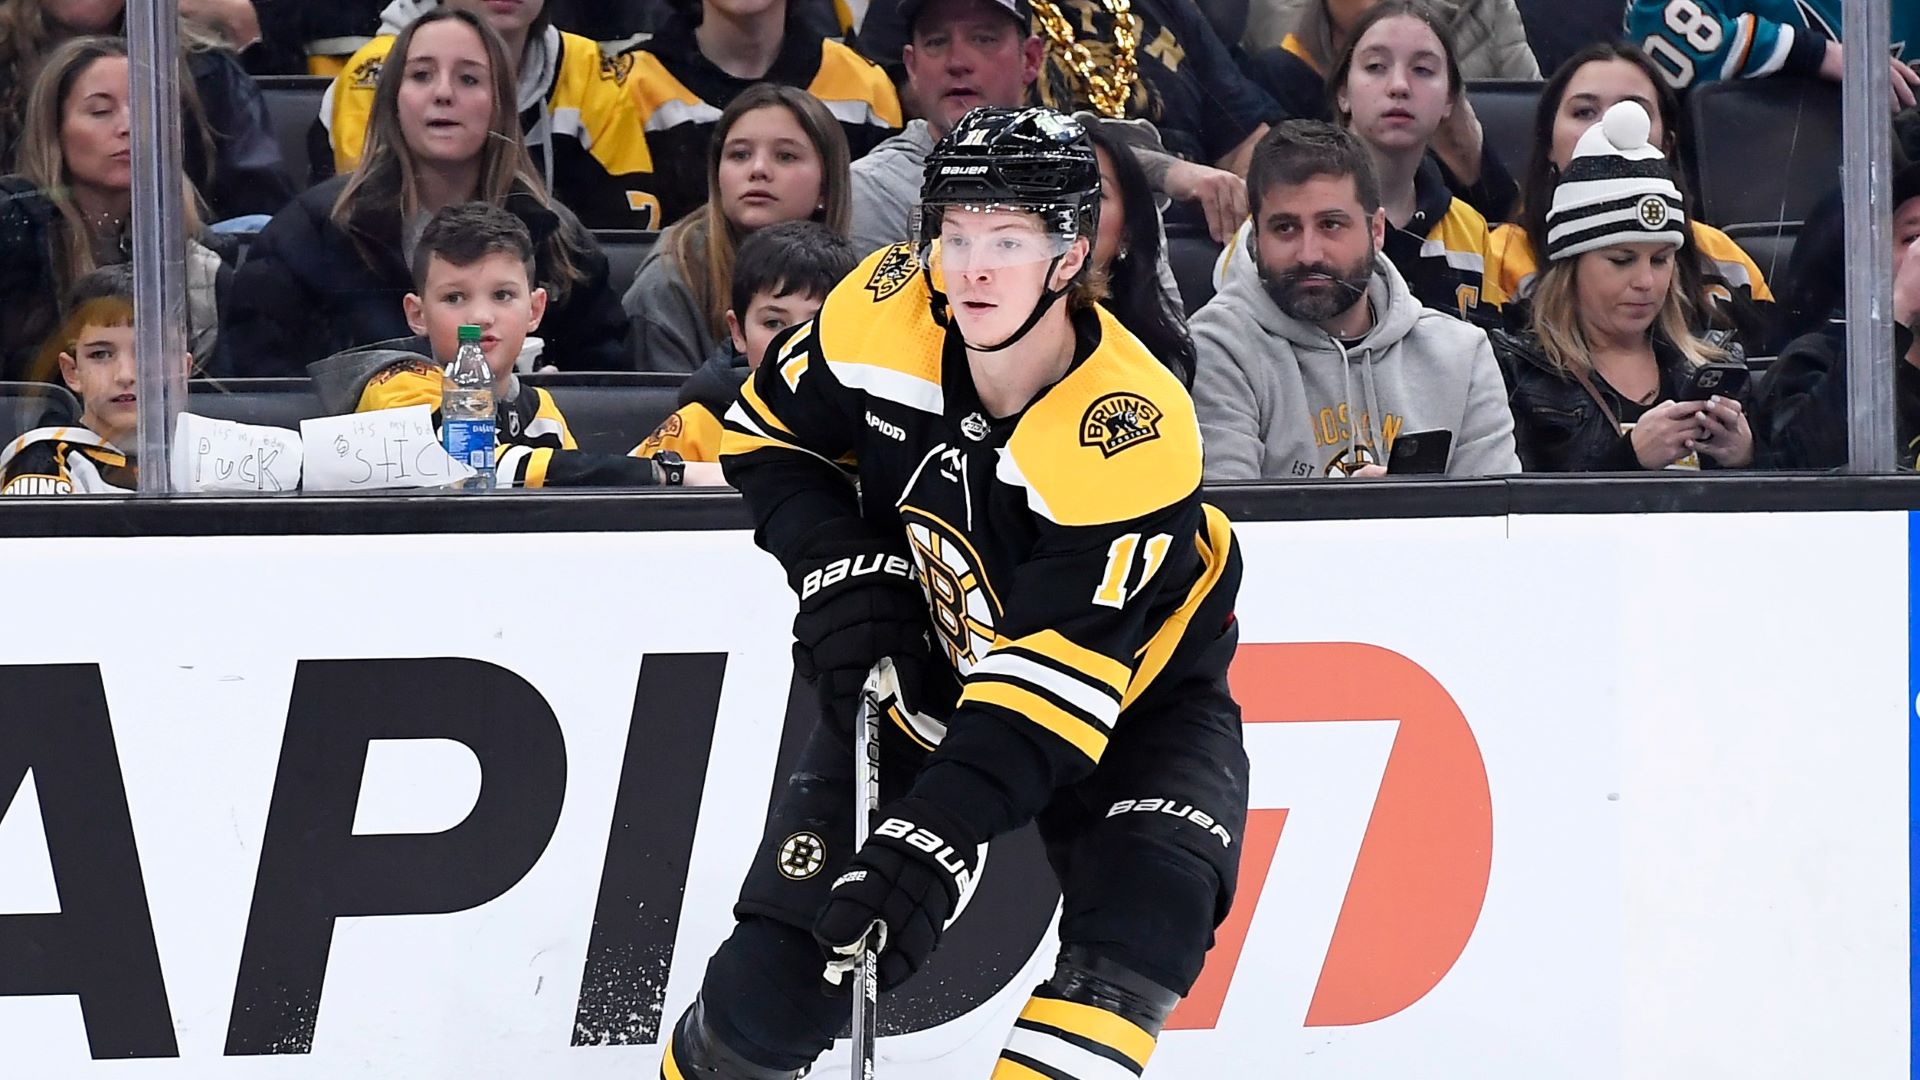 Who Plays LW on Bruins 2nd Line + What is Trent Frederic's Role